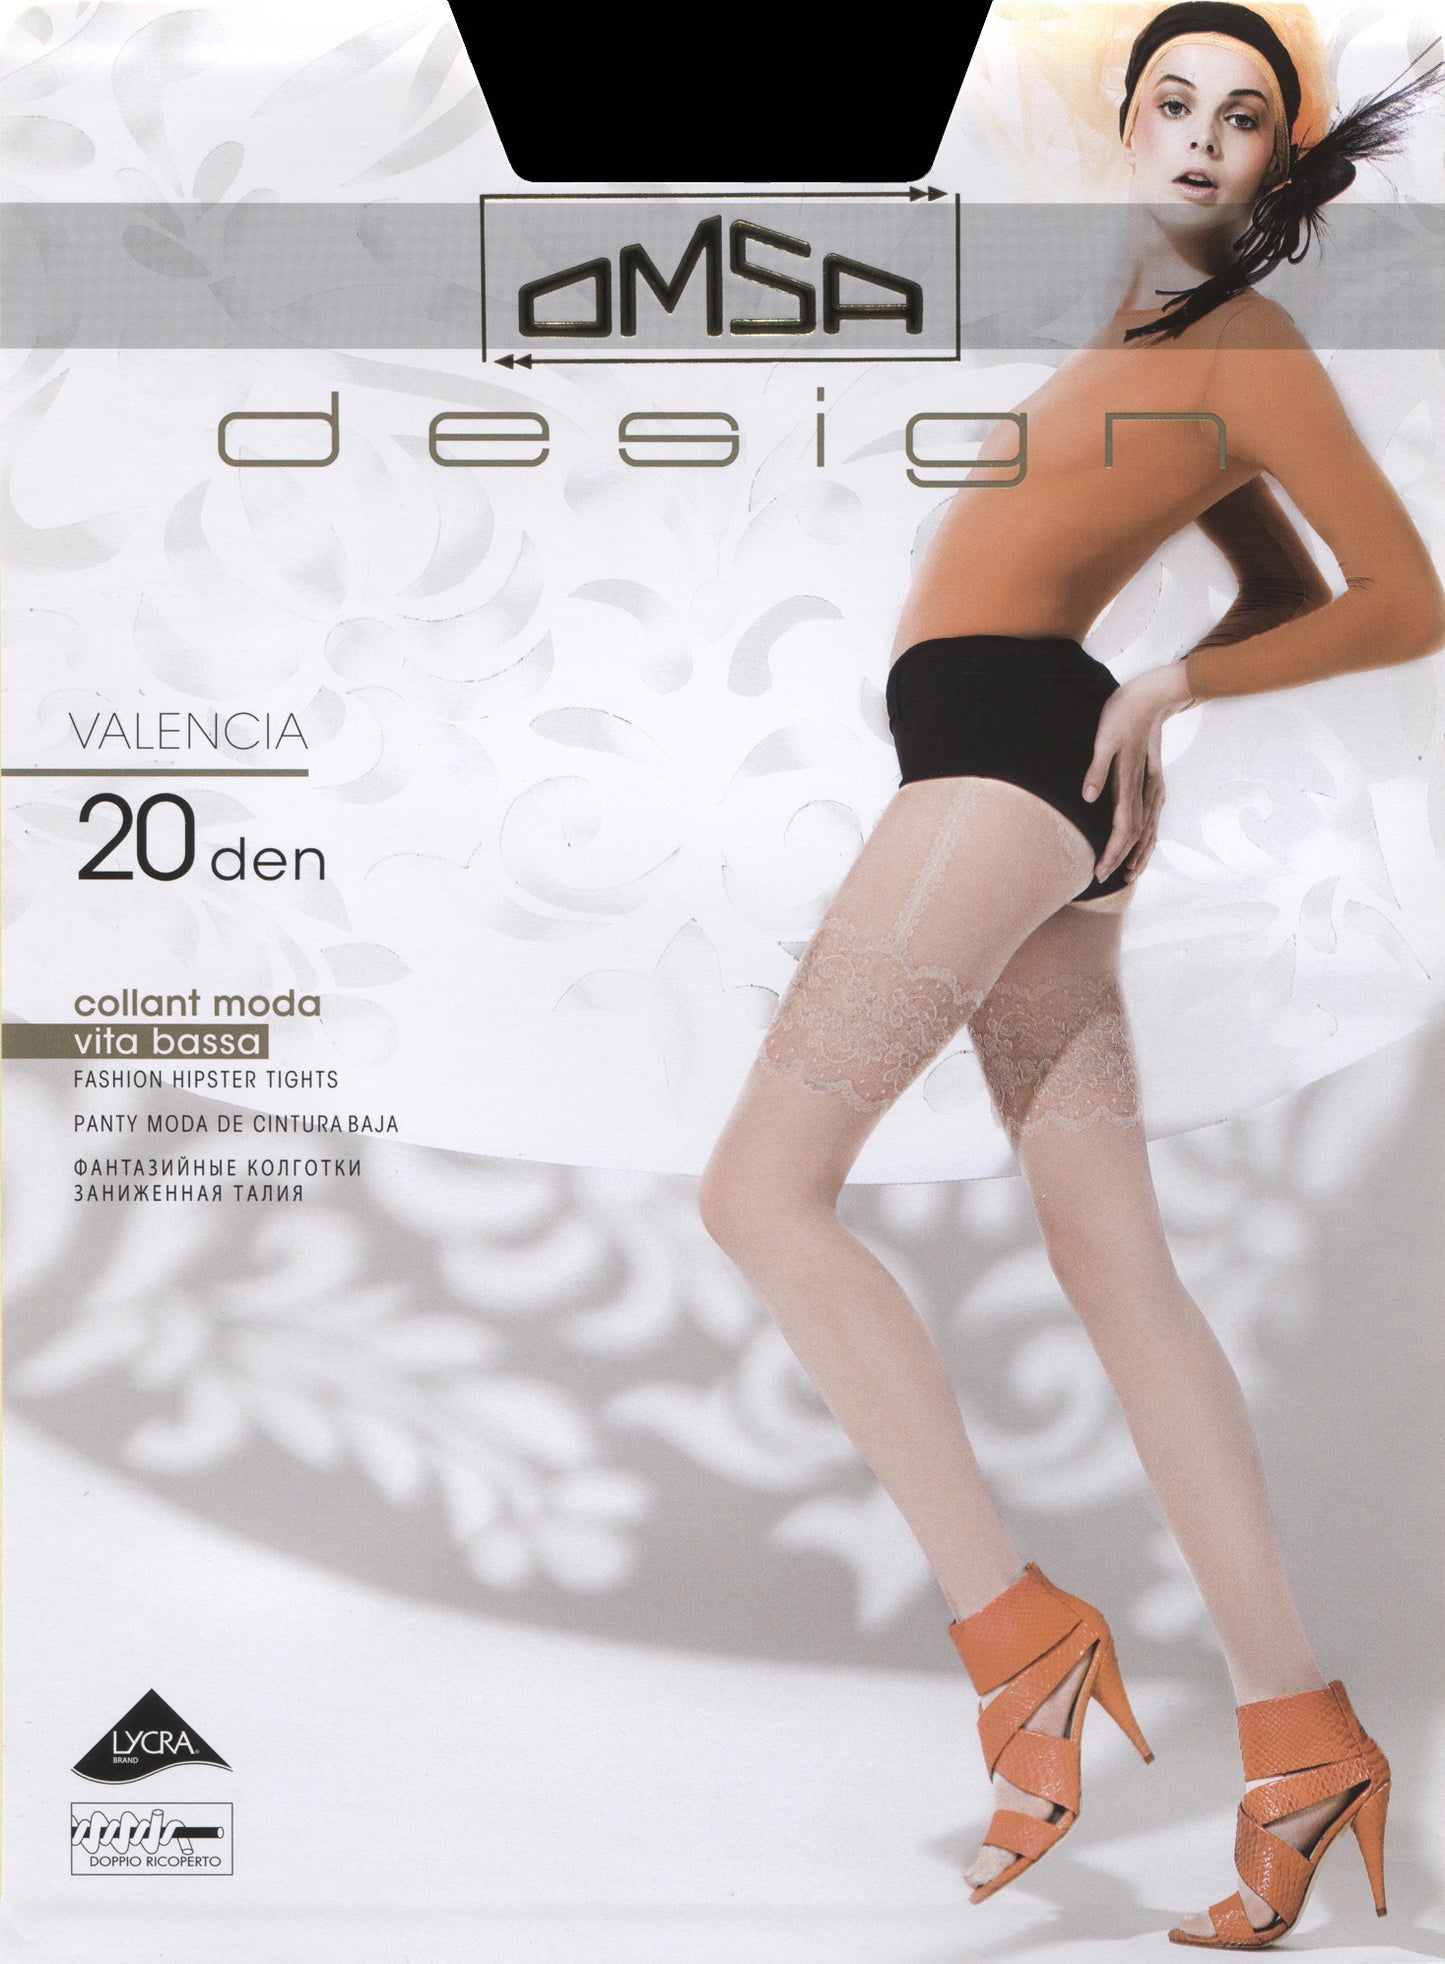 Omsa Valencia Collant - Sheer fashion hipster tights with a lace top stocking and suspender briefs design, deep low waist band, flat seams, hygienic gusset and invisible toes. Available in ivory and black.